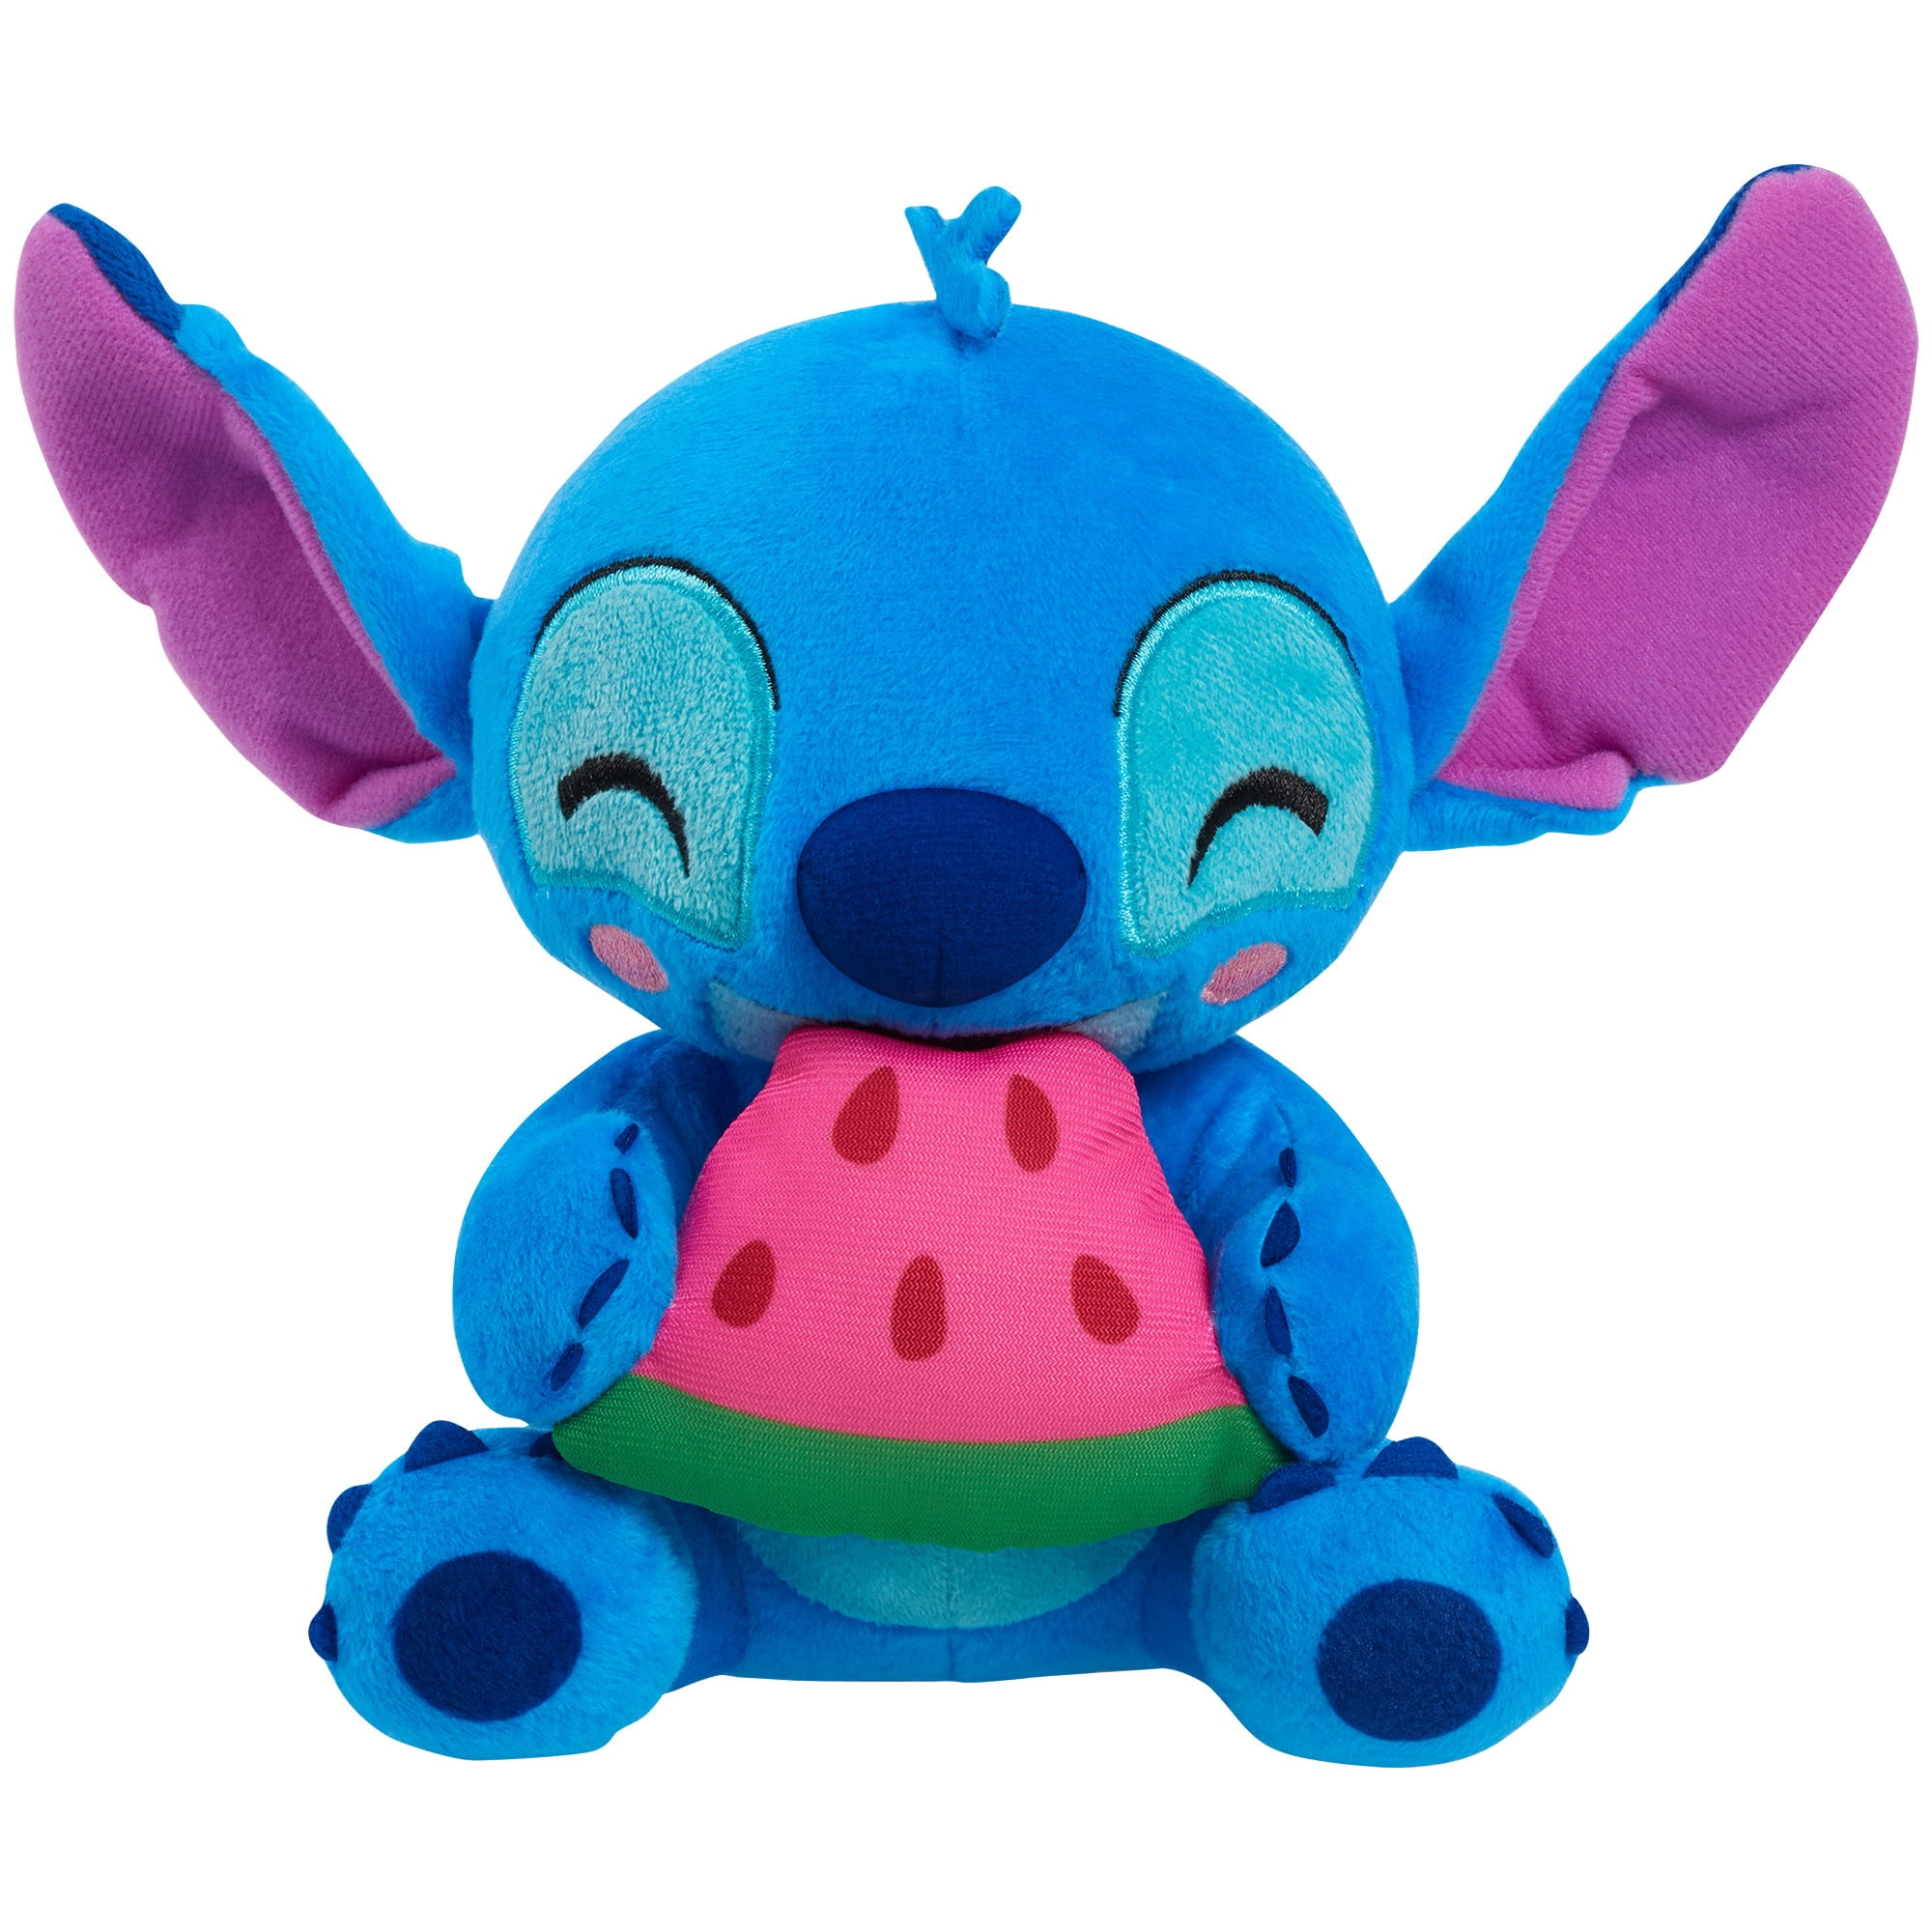 Disney Classics 23-inch Jumbo Plush with Lil Friend, Stuffed Animal, Alien,  Officially Licensed Kids Toys for Ages 2 Up,  Exclusive